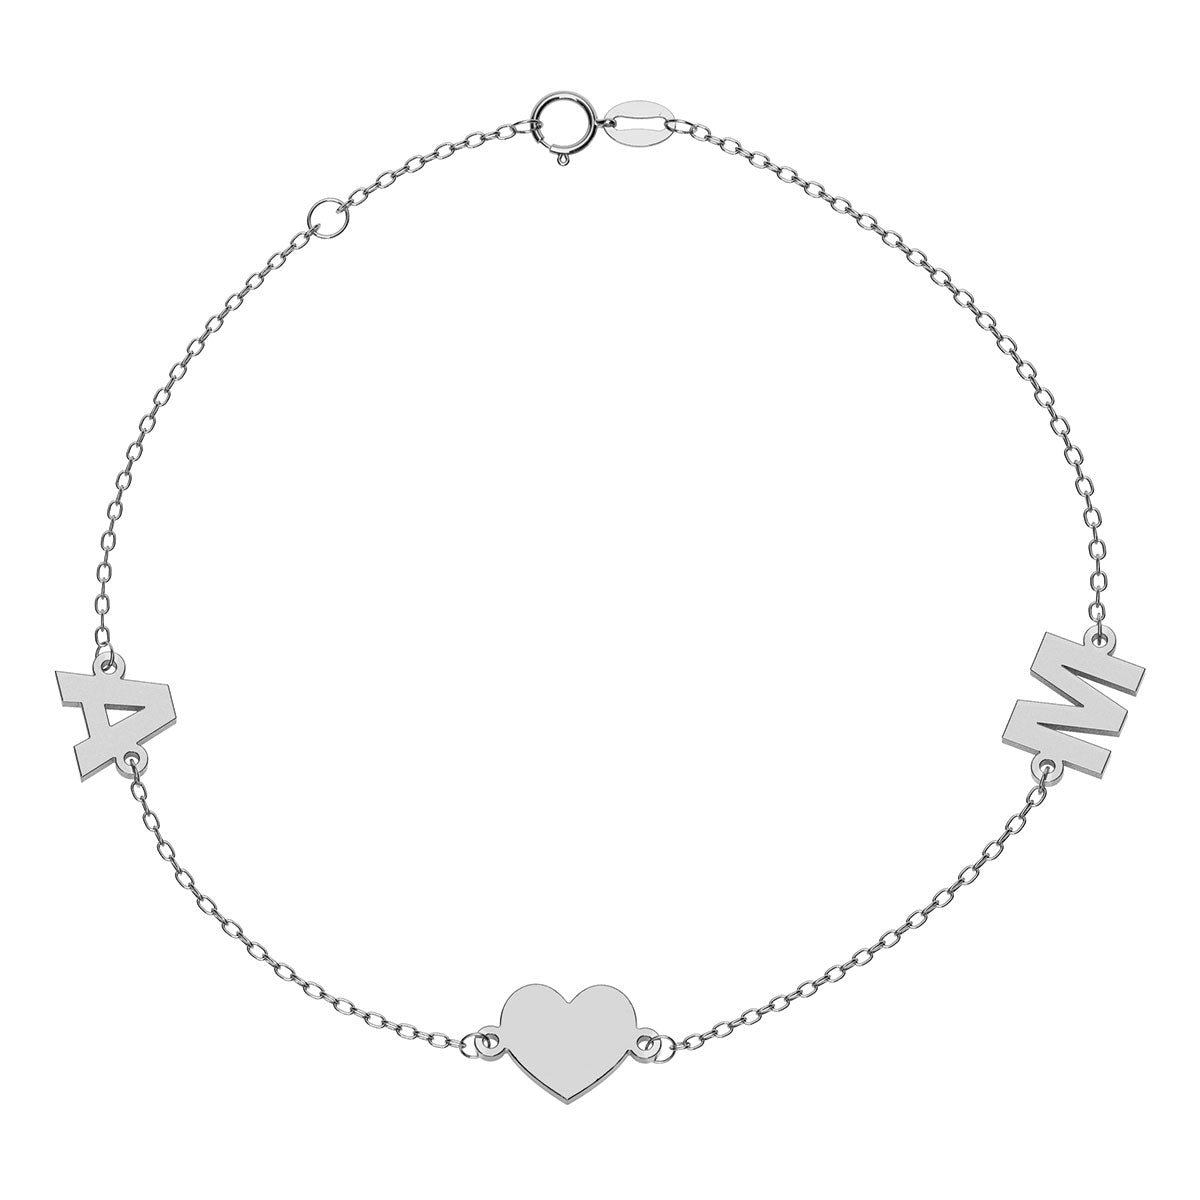 Personalized 2 Initial Bracelet With Heart Charm